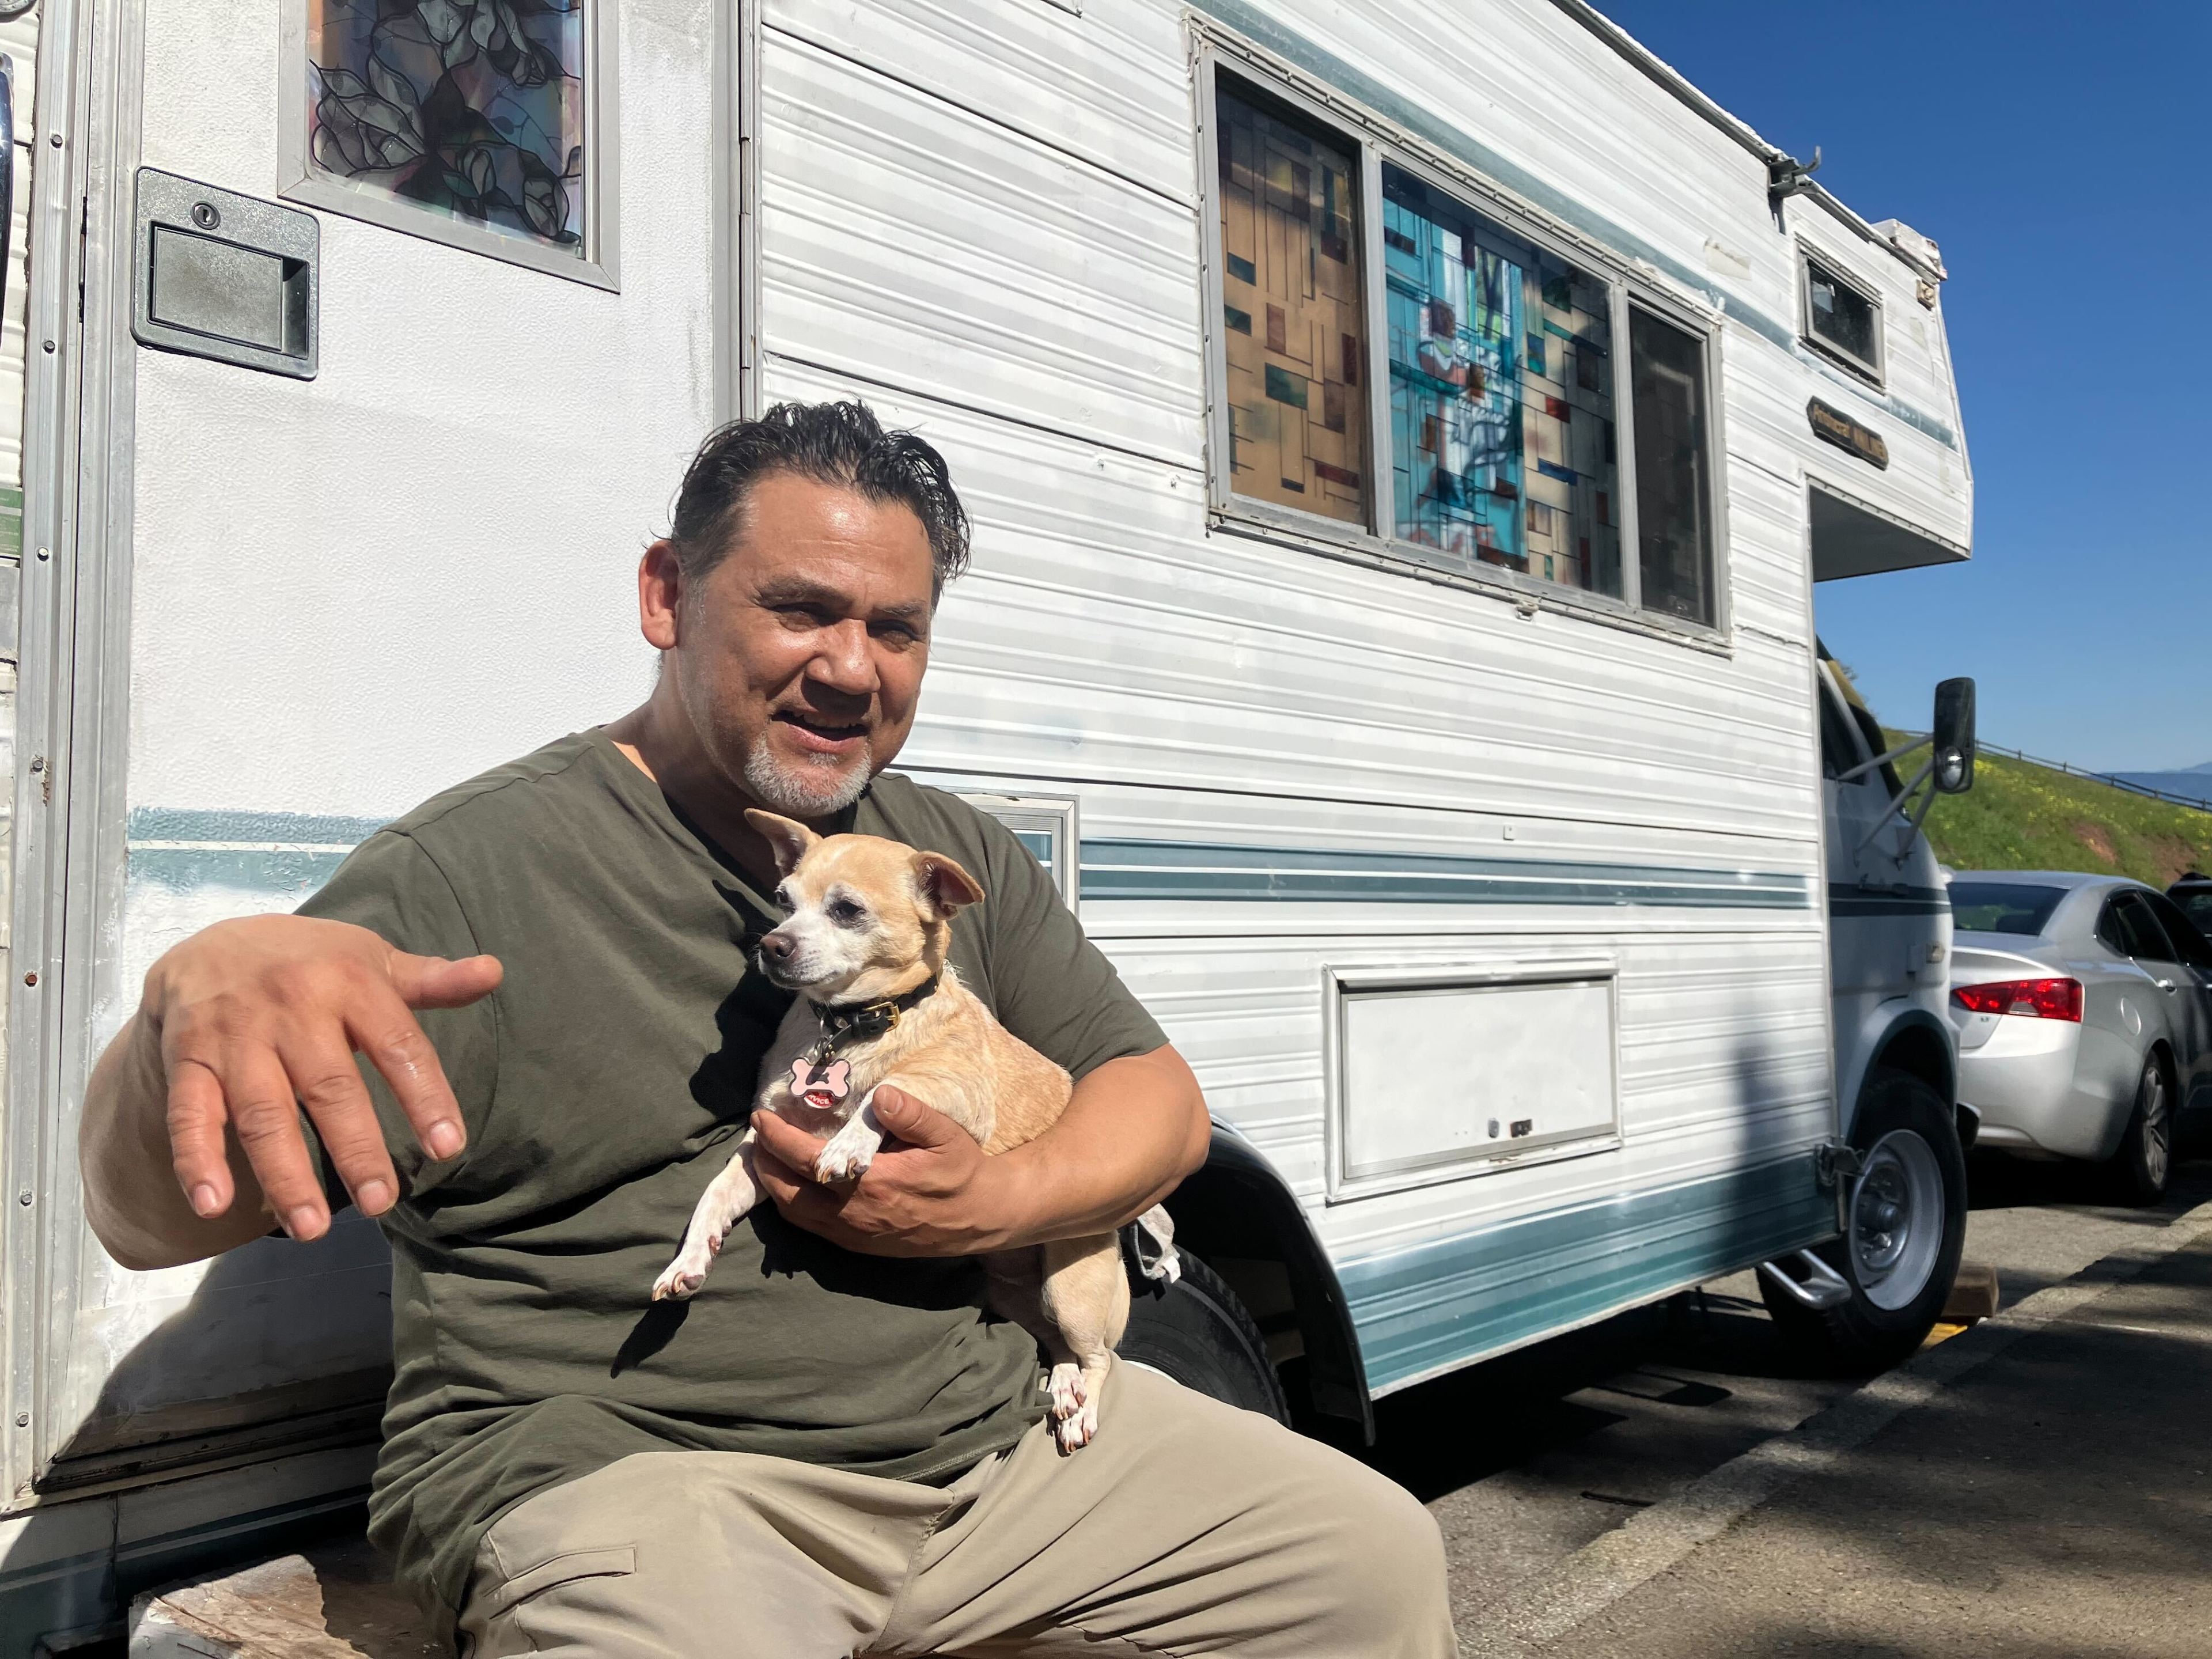 Man holds dog while sitting in front of white RV parked along street